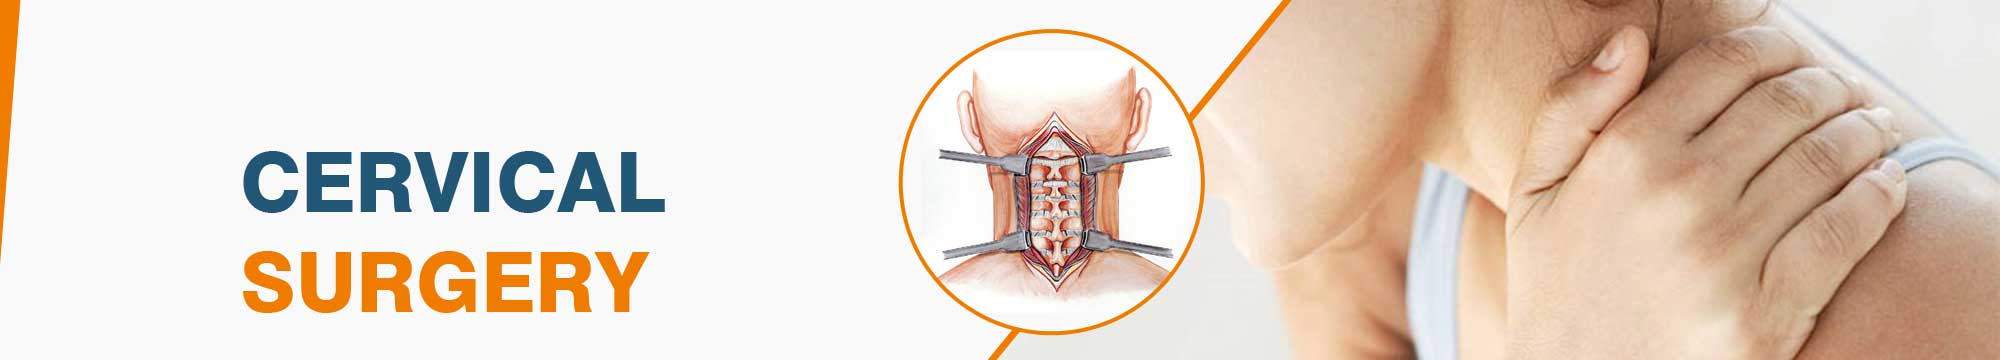 Cervical Surgery in India